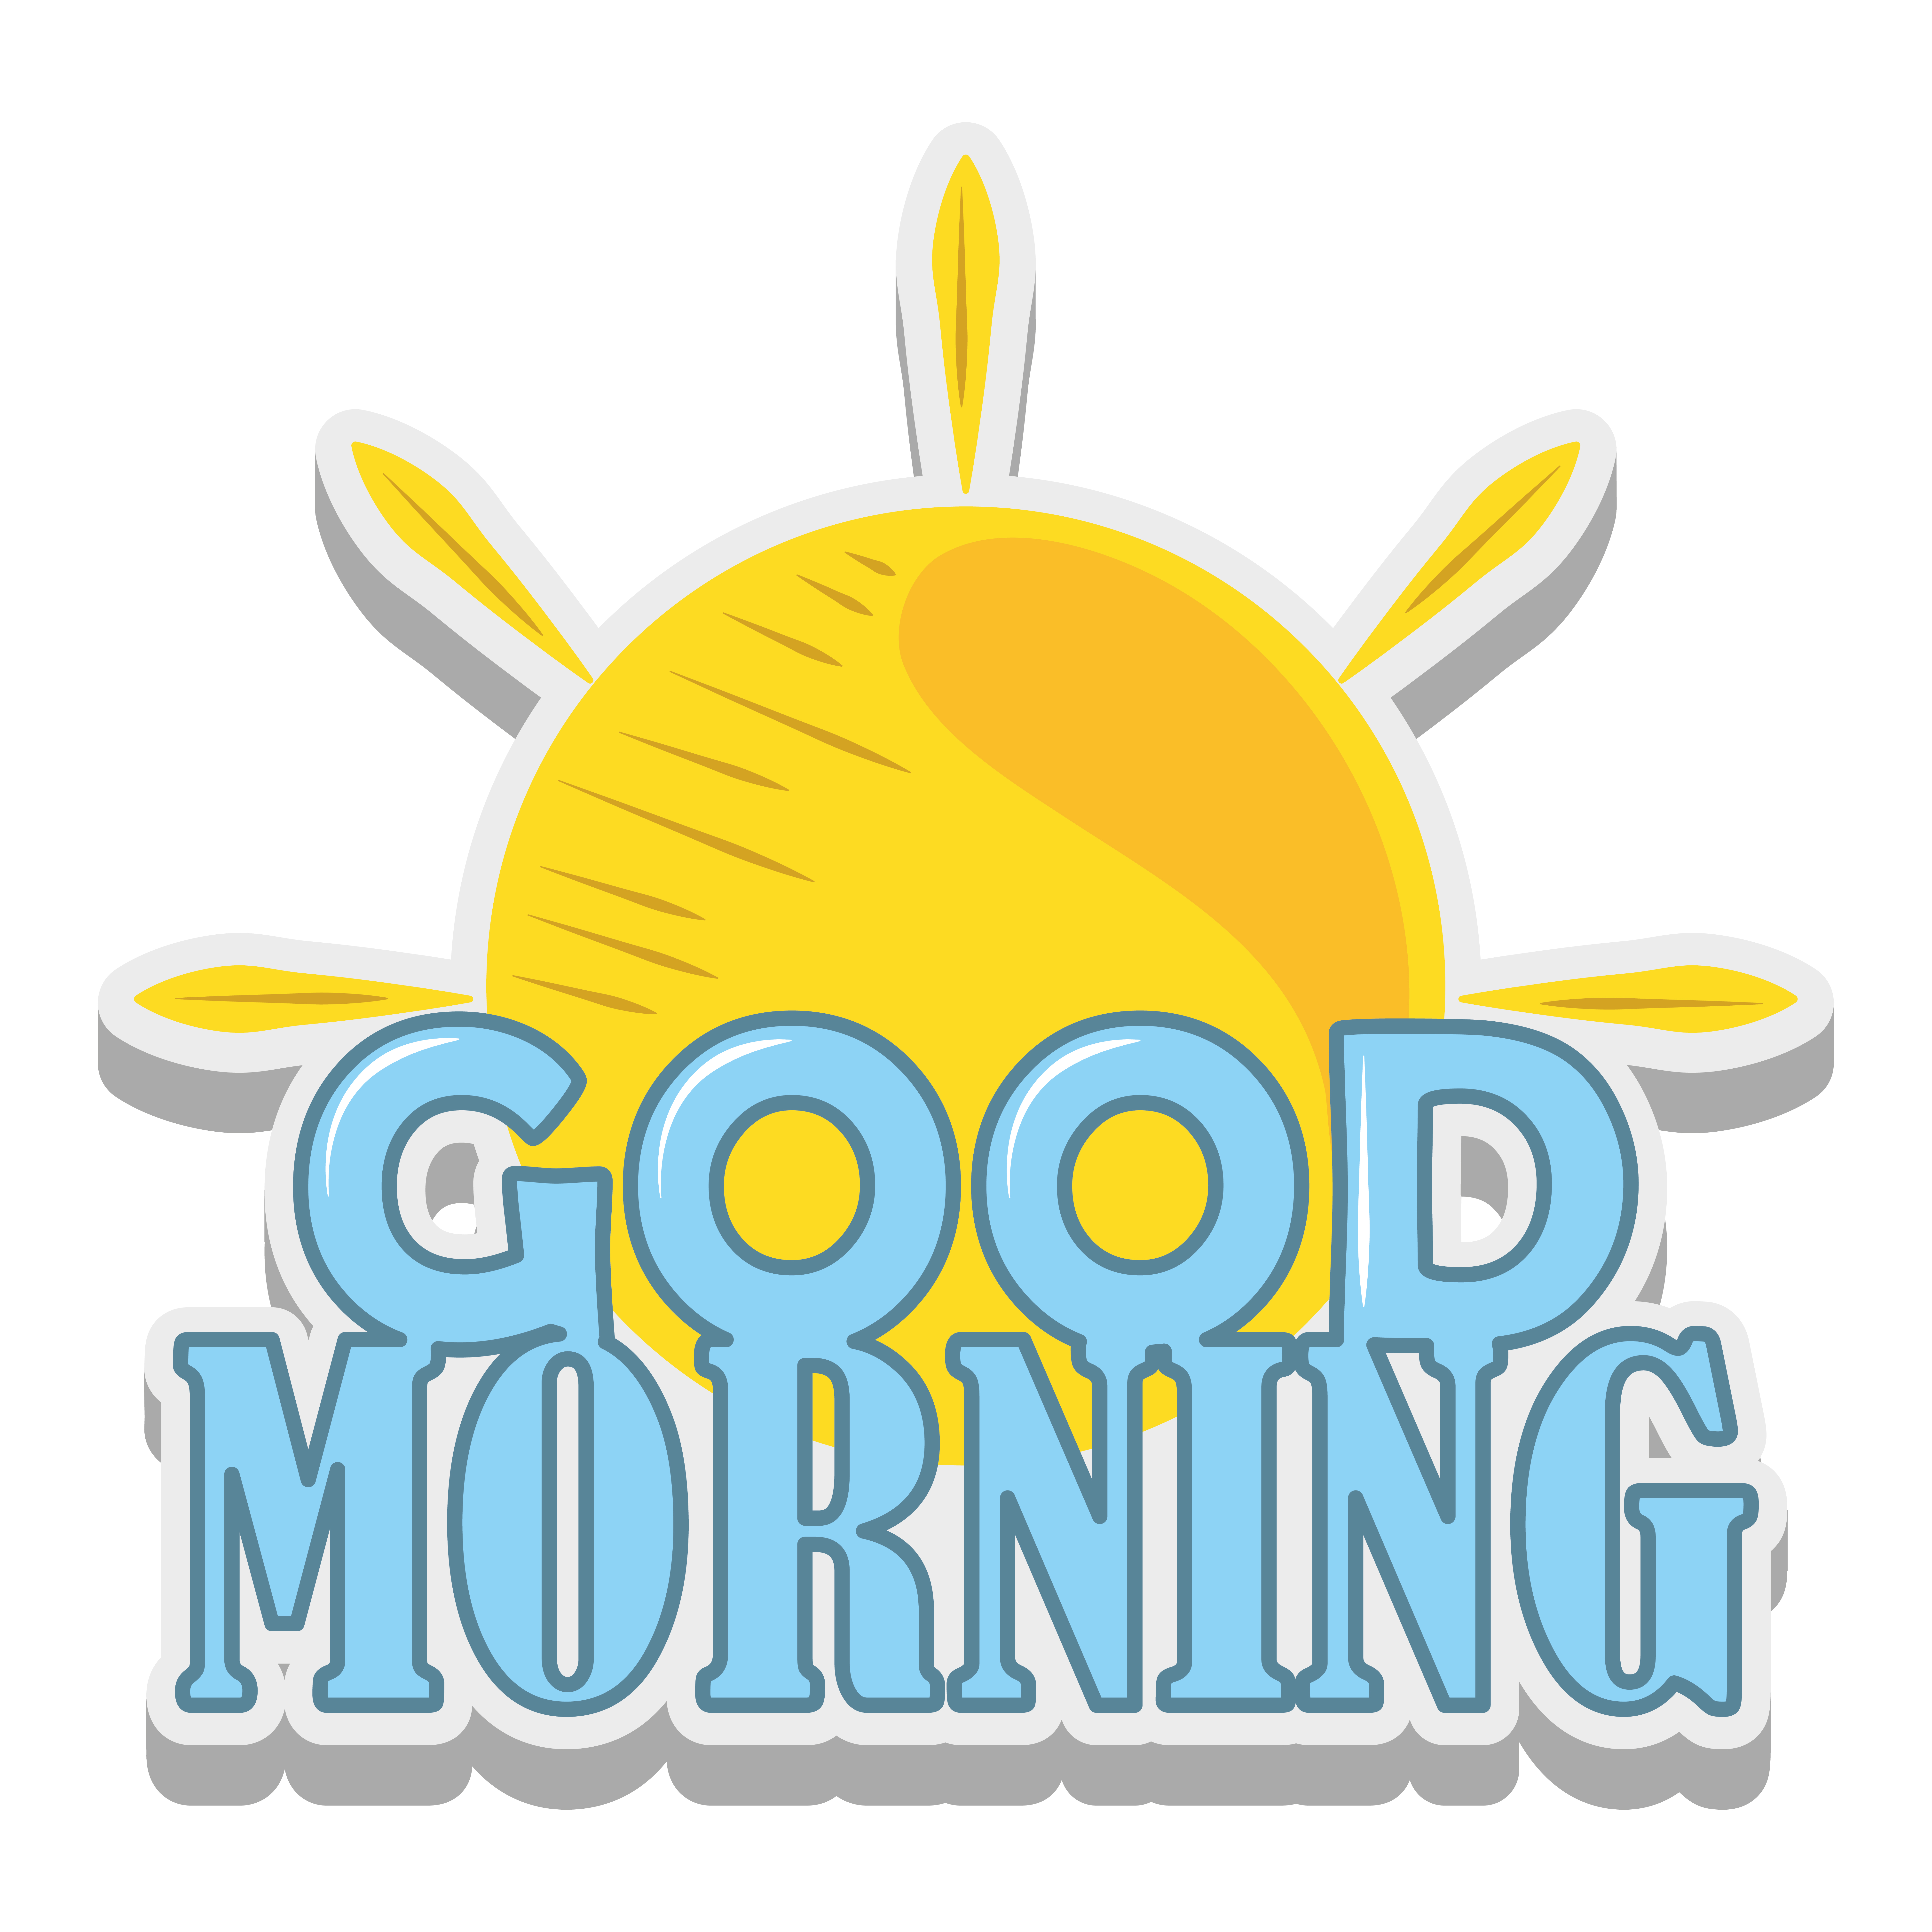 Good Morning Vector Art, Icons, and Graphics for Free Download